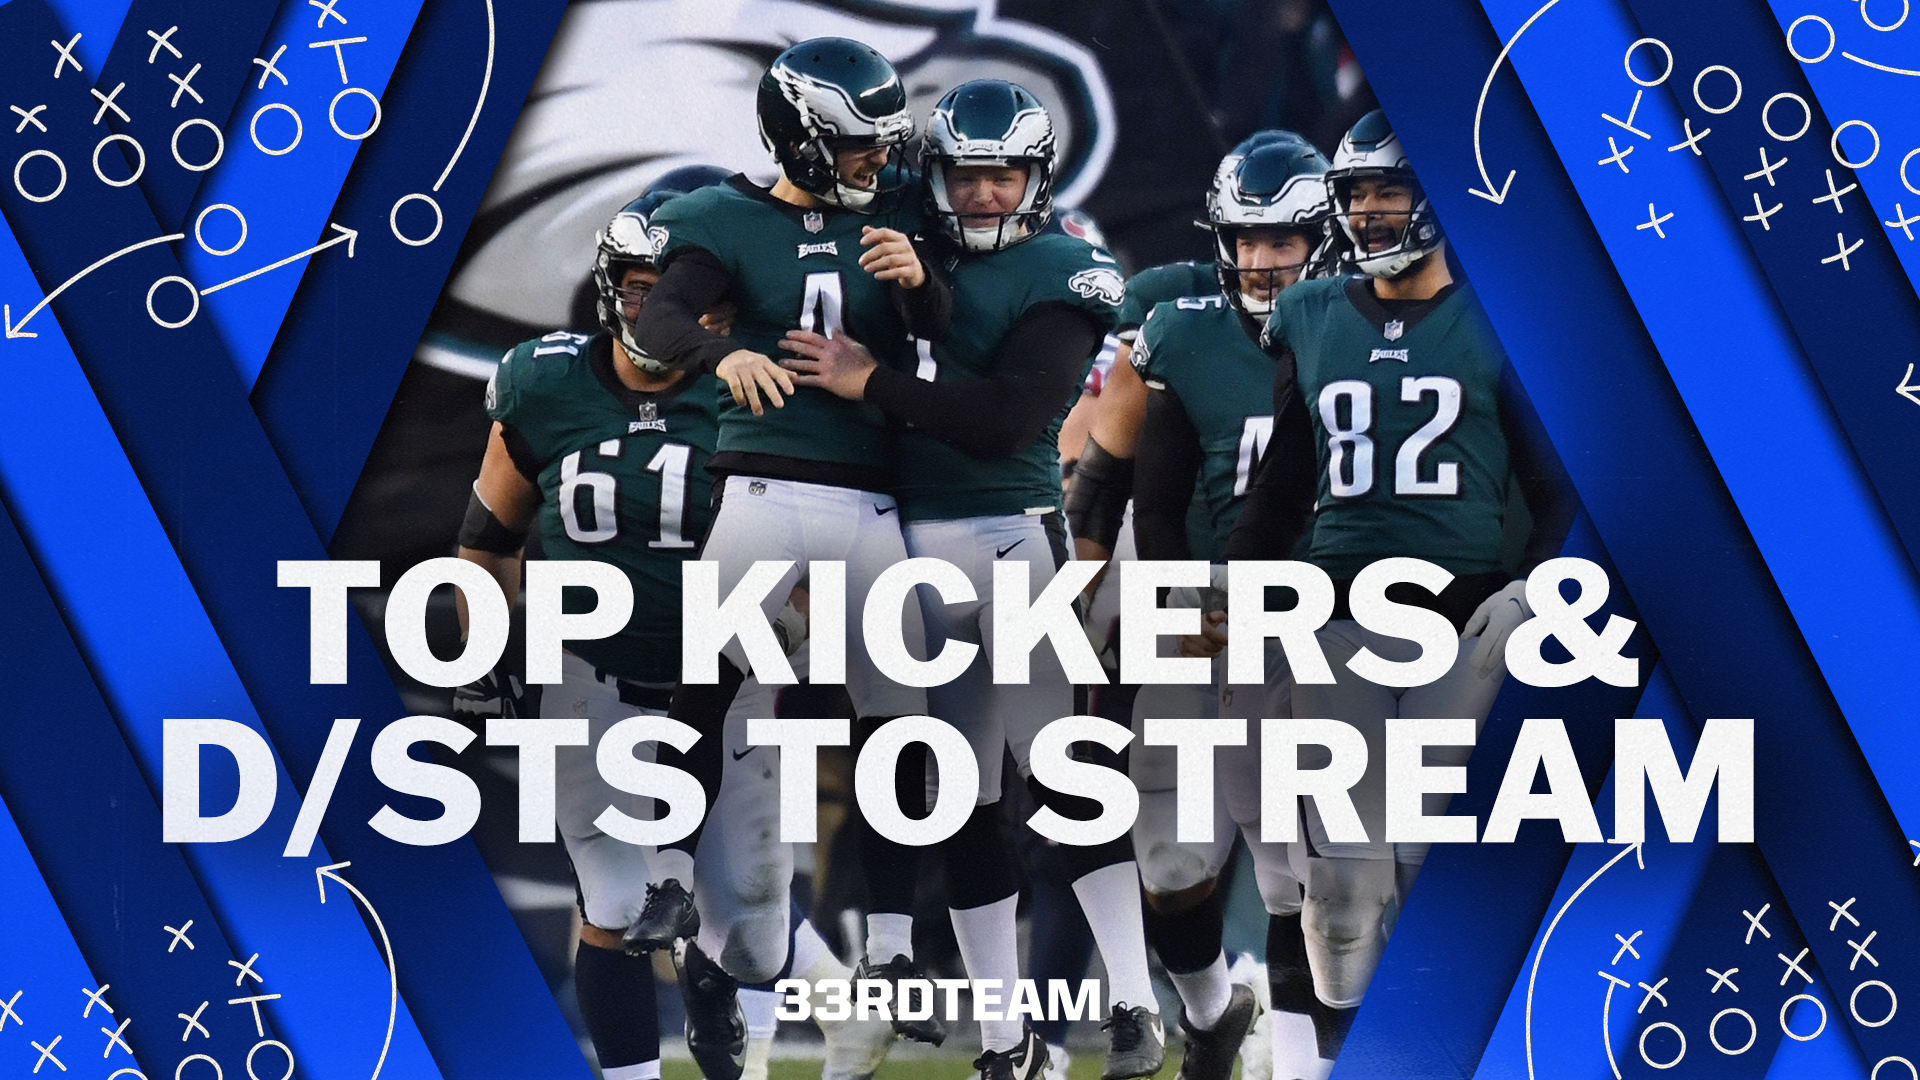 Top Kickers & D/STs to Stream in Week 3